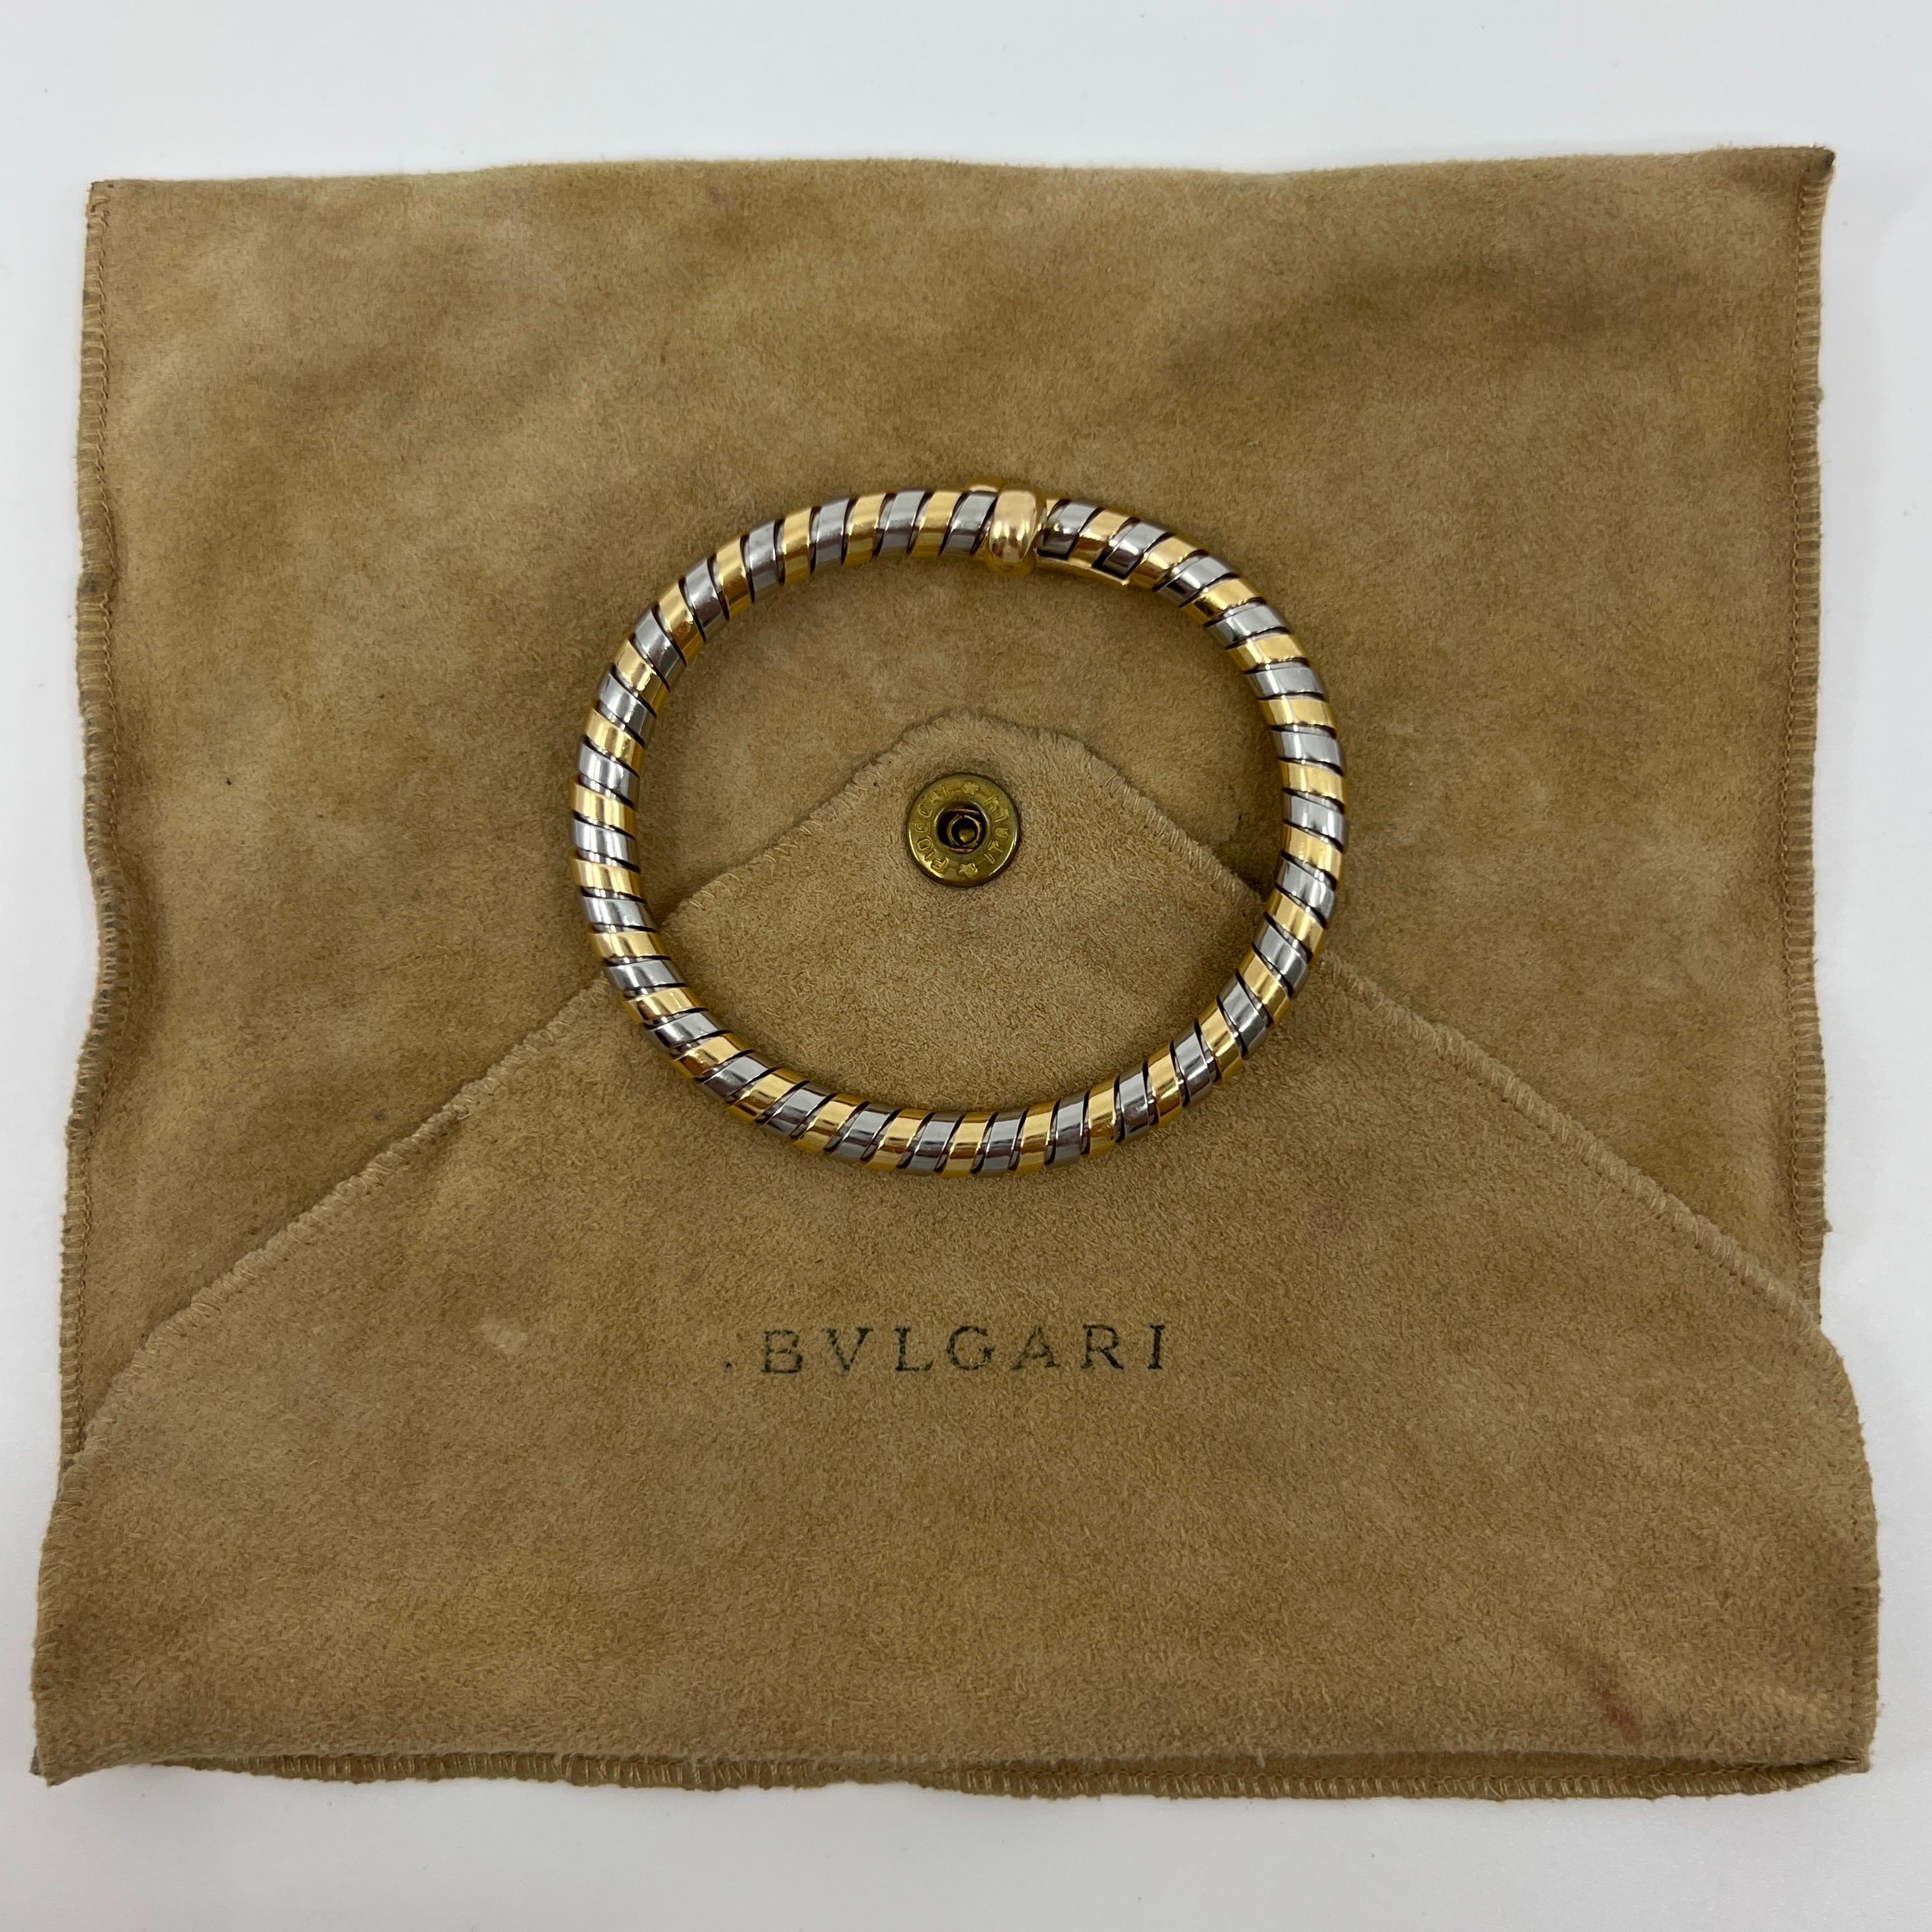 Very Rare Vintage Bvlgari Tubogas 18k Yellow Gold & Stainless Steel Bracelet.

Stunning Bvlgari bracelet with signature Tubogas Parentesi style. The origins of the Serpenti collection from Bvlgari.
This bracelet has a stainless steel flexible body